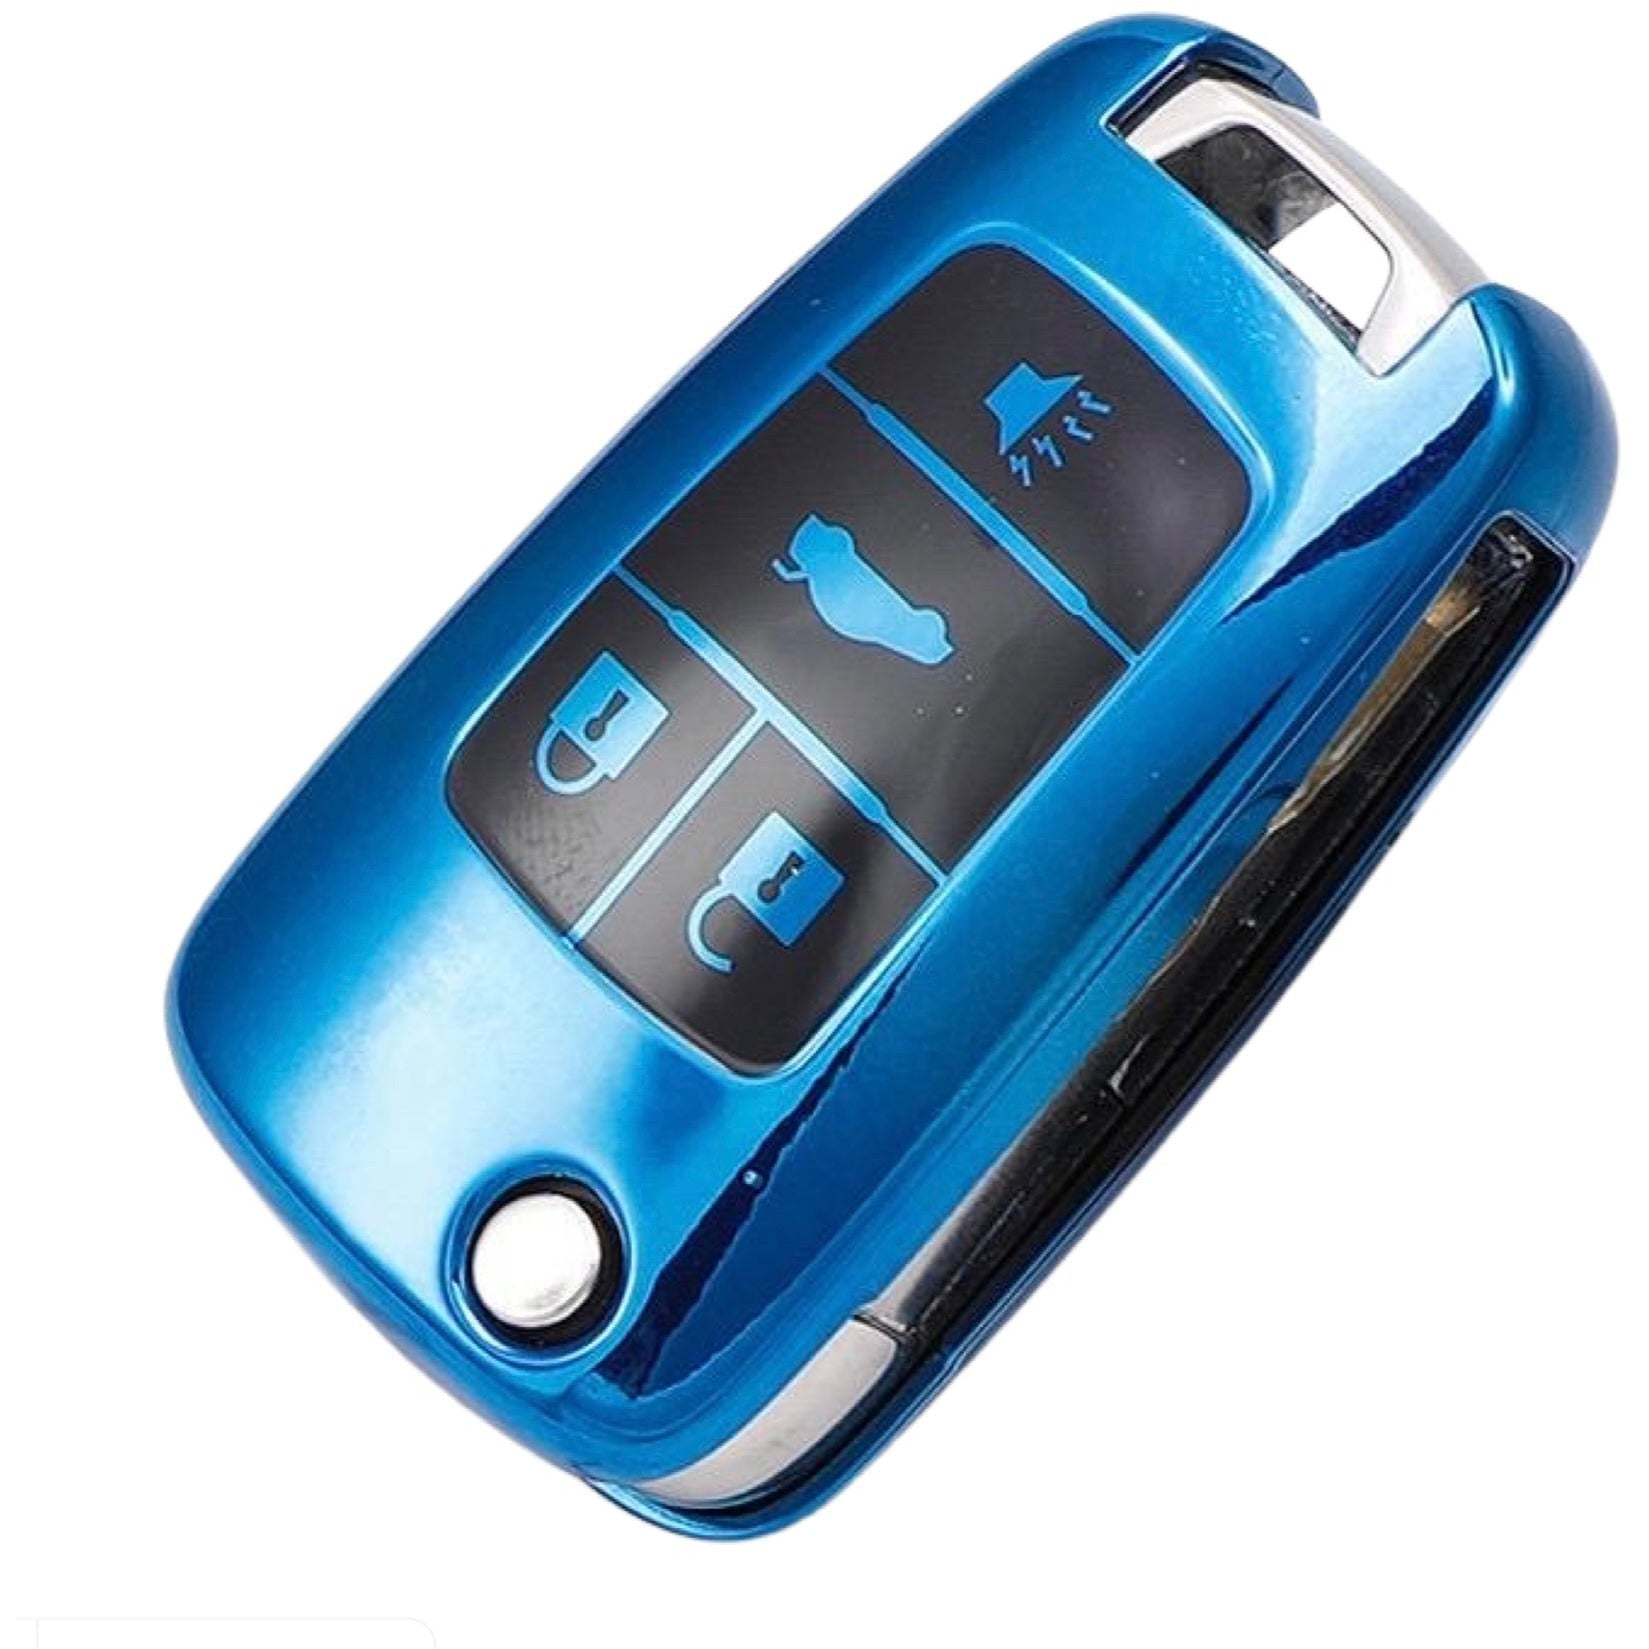 Holden Key Cover blue | Commodore | Keysleeves car accessories